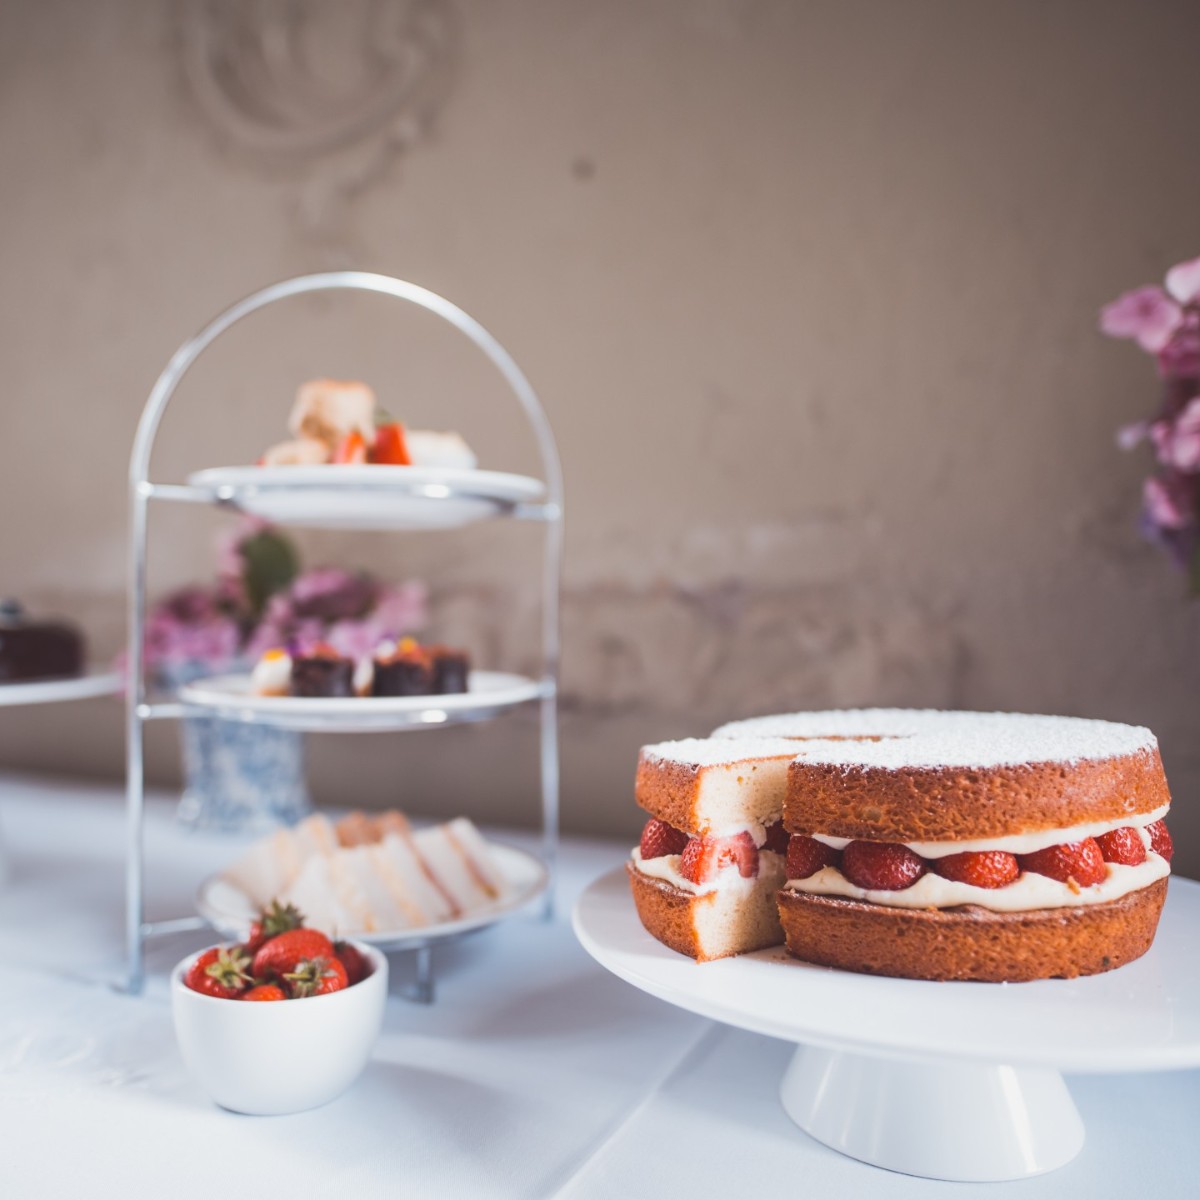 Whilst enjoying activities on the Knowsley Estate during your #privatestay, step back in time & enjoy a quintessentially English afternoon tea in the unique setting of the Octagon temple #uniquevenues #luxuryretreat #countryhousestays #incentivetravel#uniquedestinations